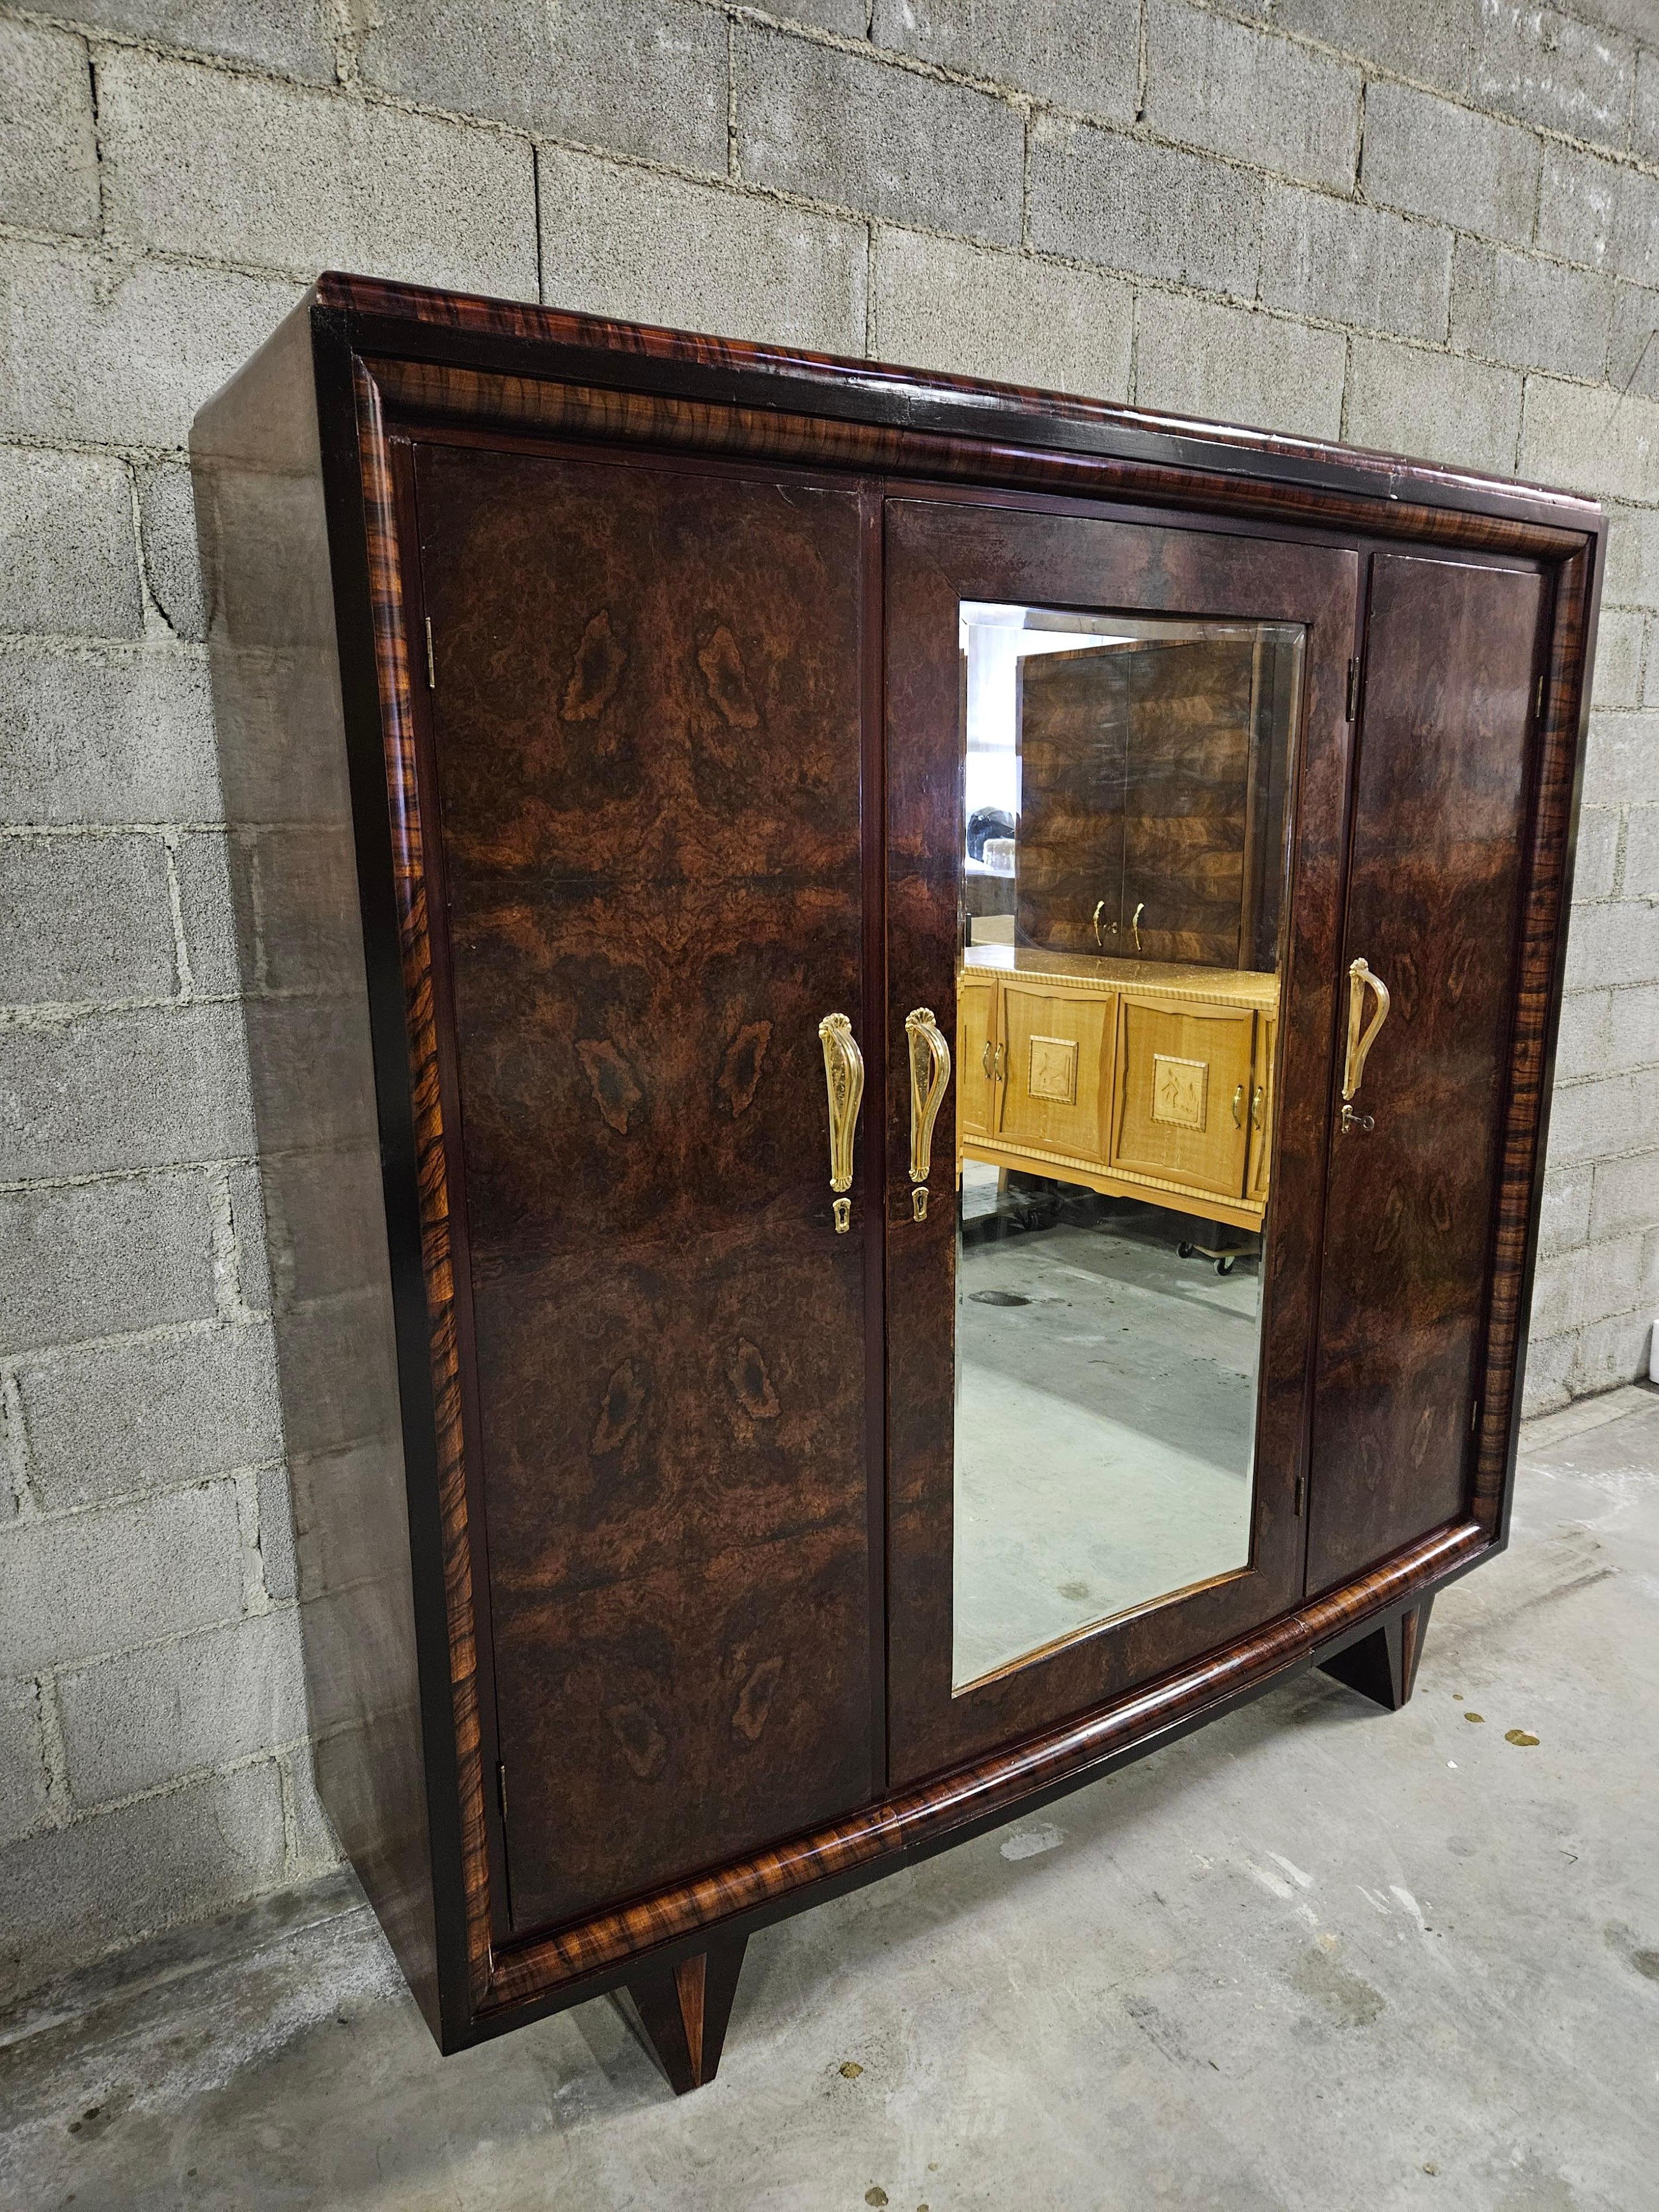 Art Deco style three-door closet, 1930s Italian production of high quality and workmanship.

The cabinet has three doors with ample interior space; on the left is a small shelf with hanging rod underneath.
In the center is a beautiful mirrored door